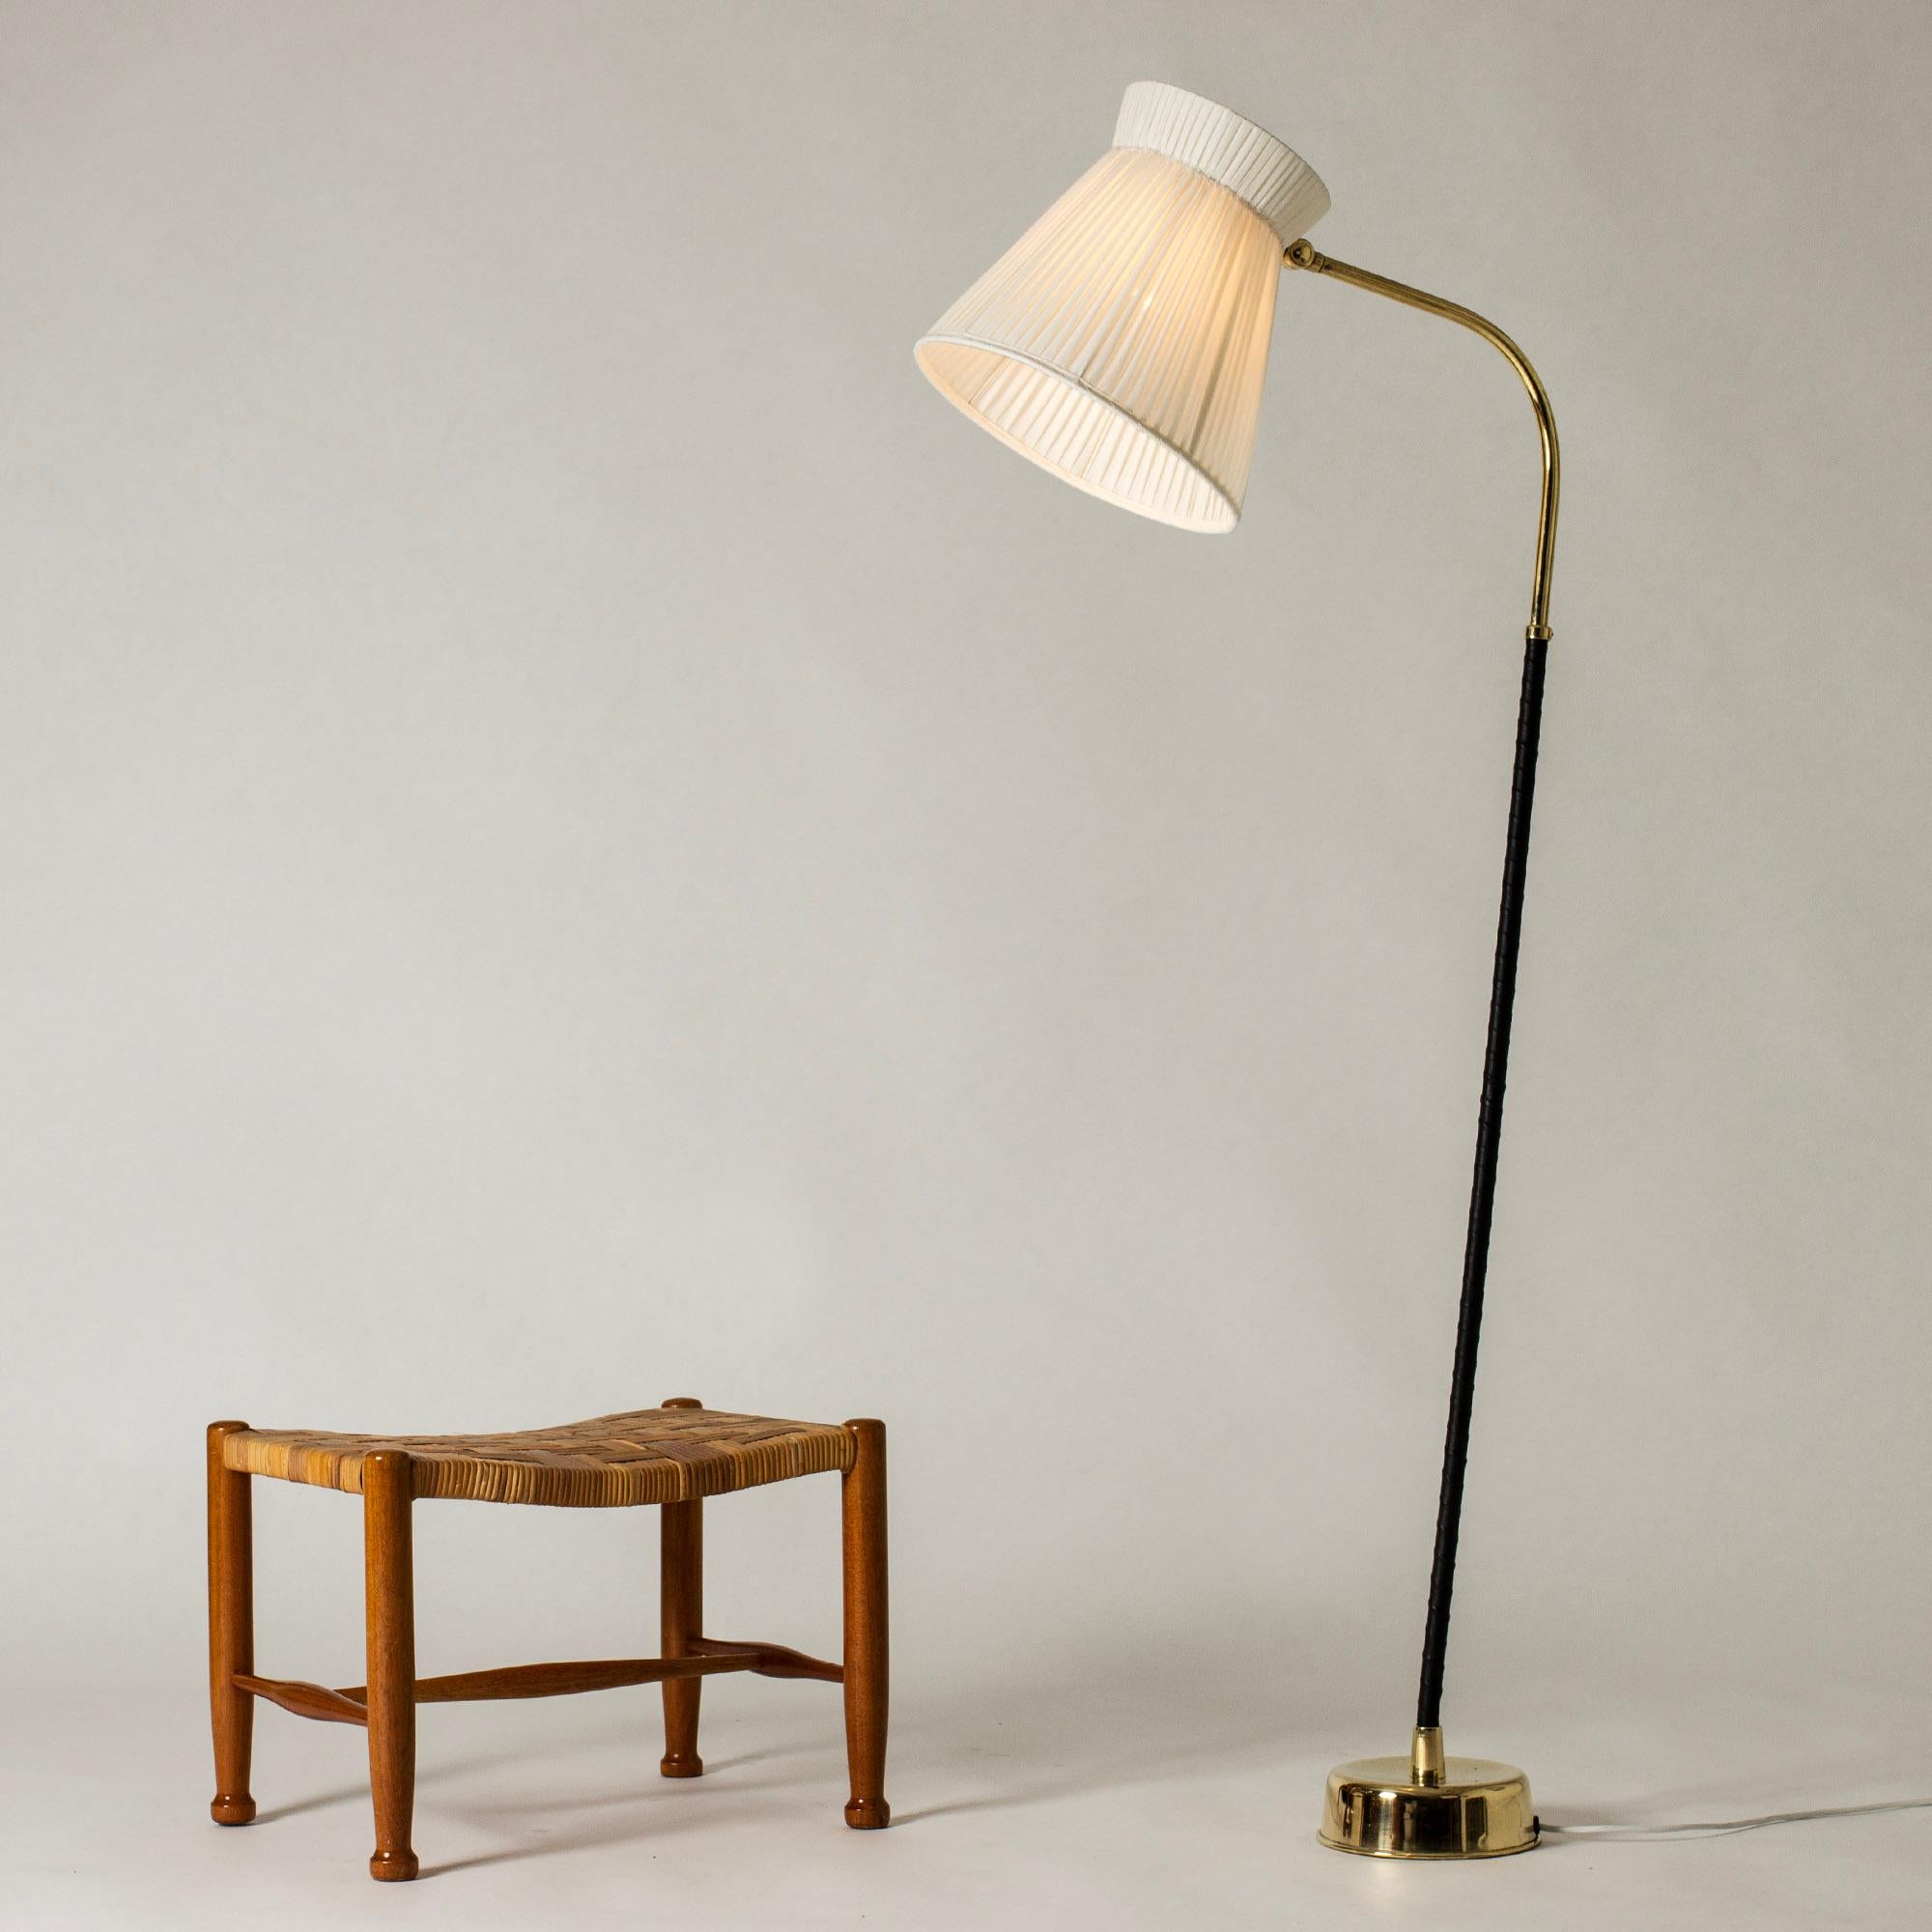 Midcentury Modern Floor Lamp by Lisa Johansson-Pape for Orno, Finland For Sale 3